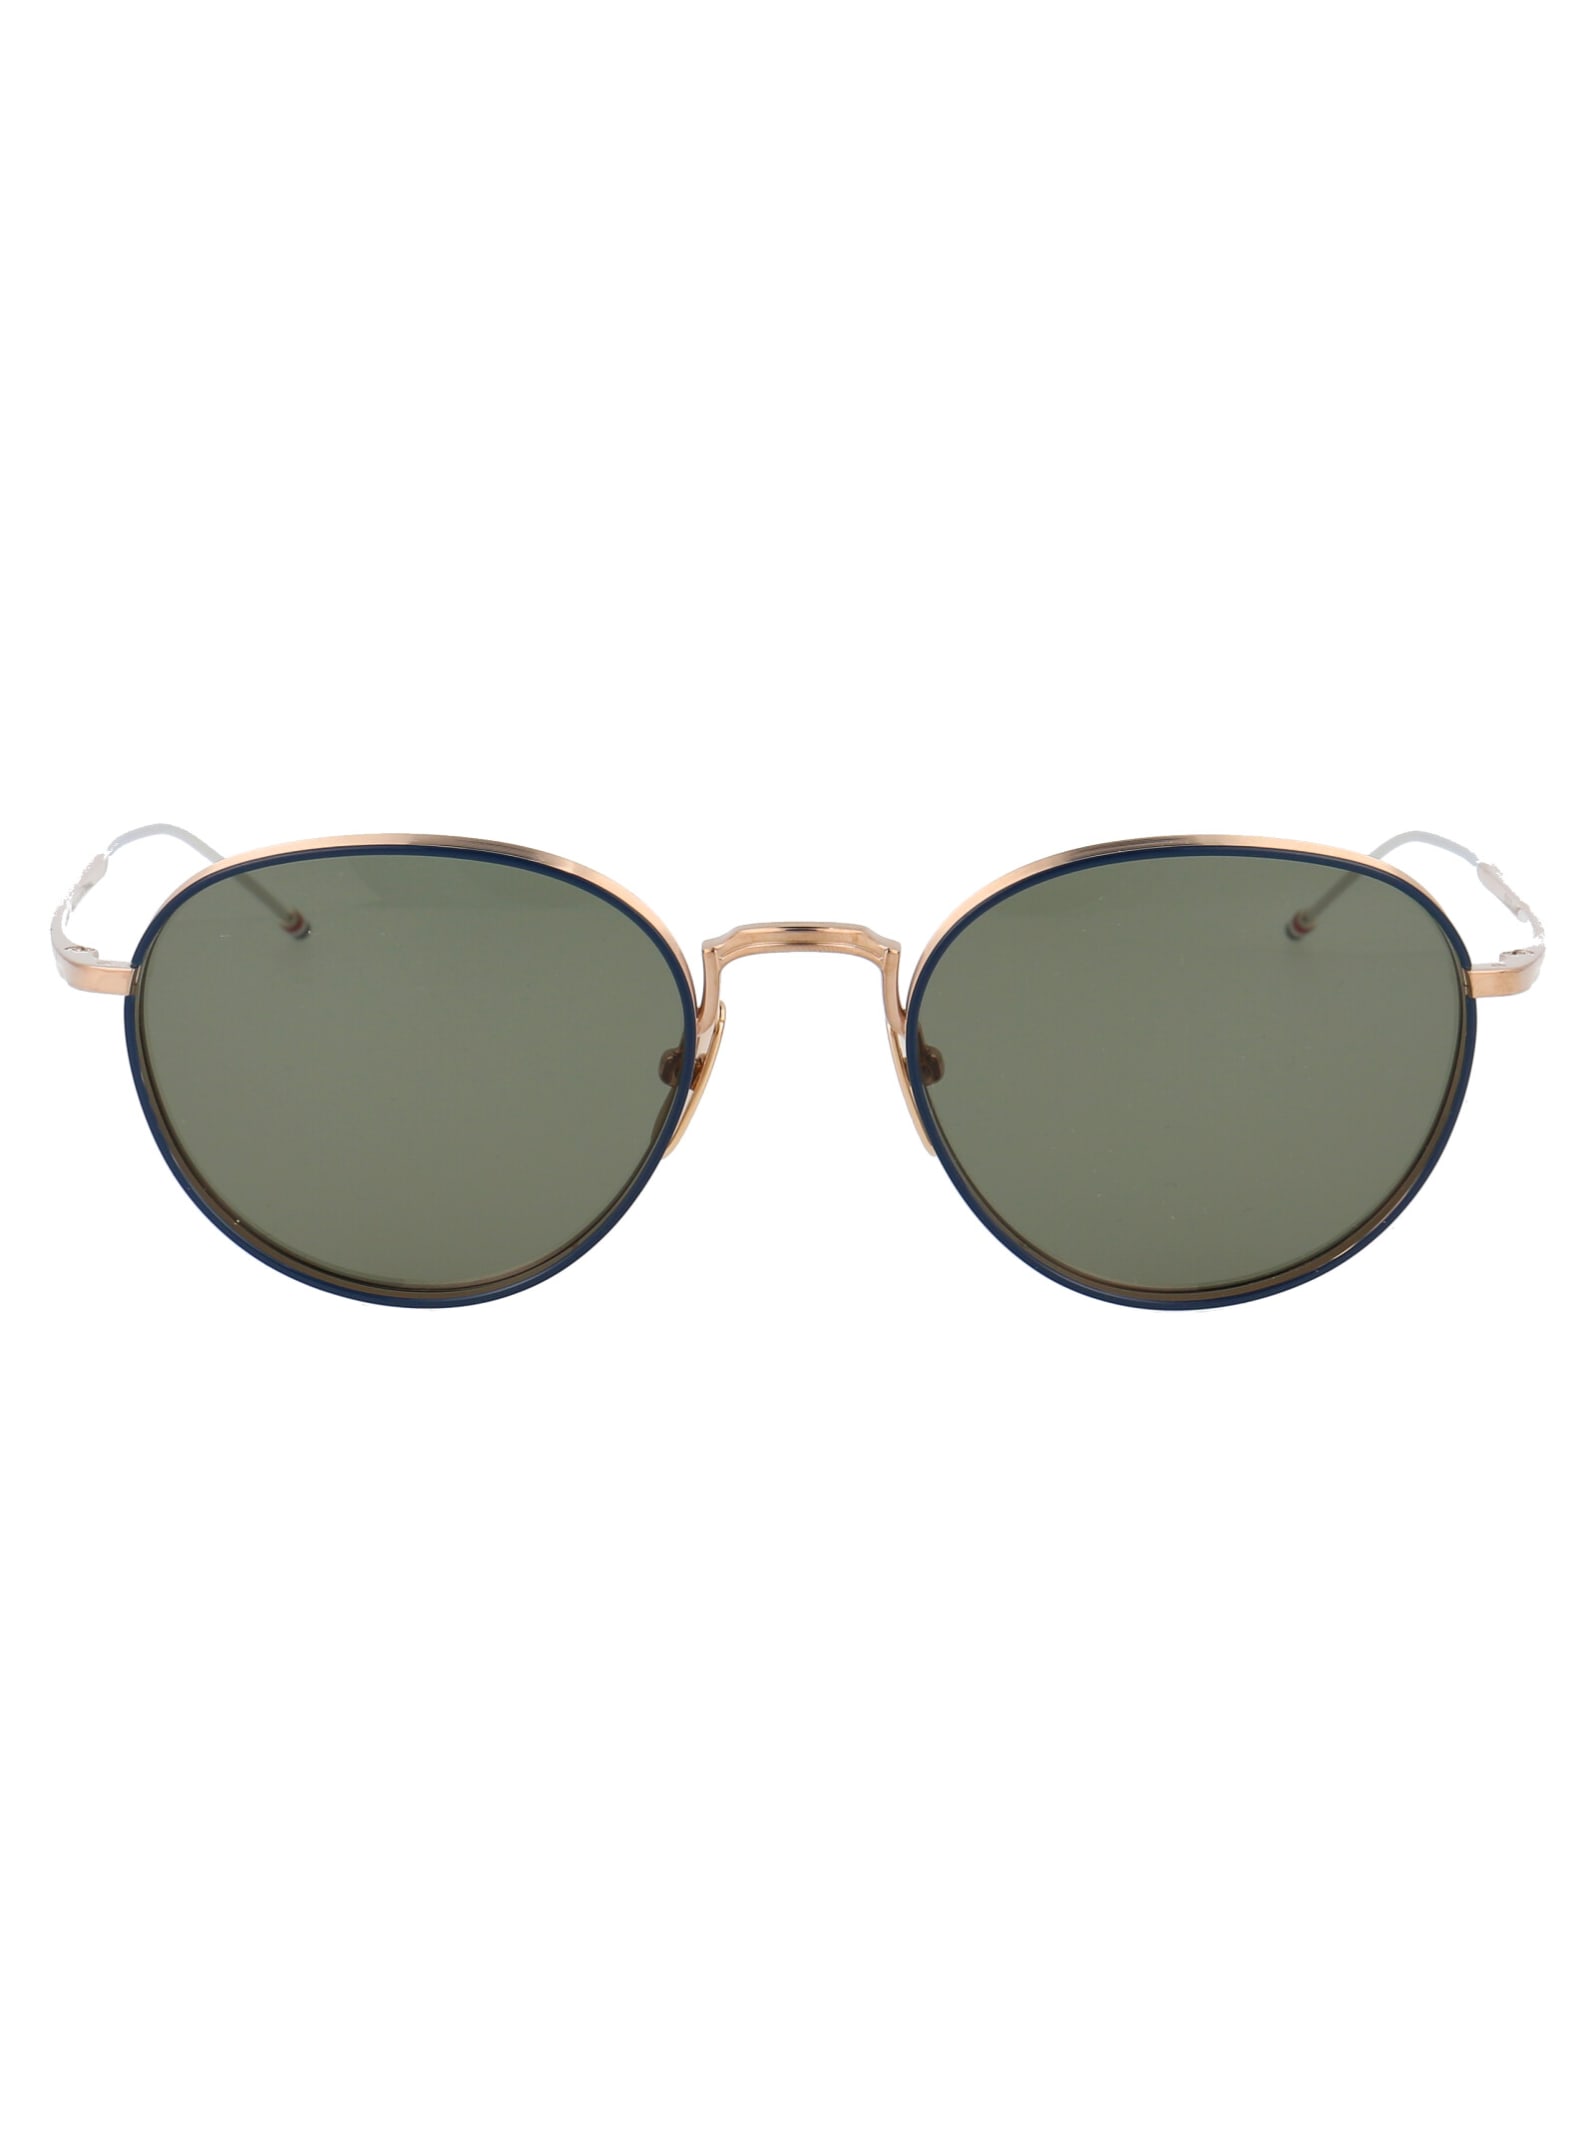 Thom Browne Tb 119 Sunglasses In White Gold Navy W/ G15